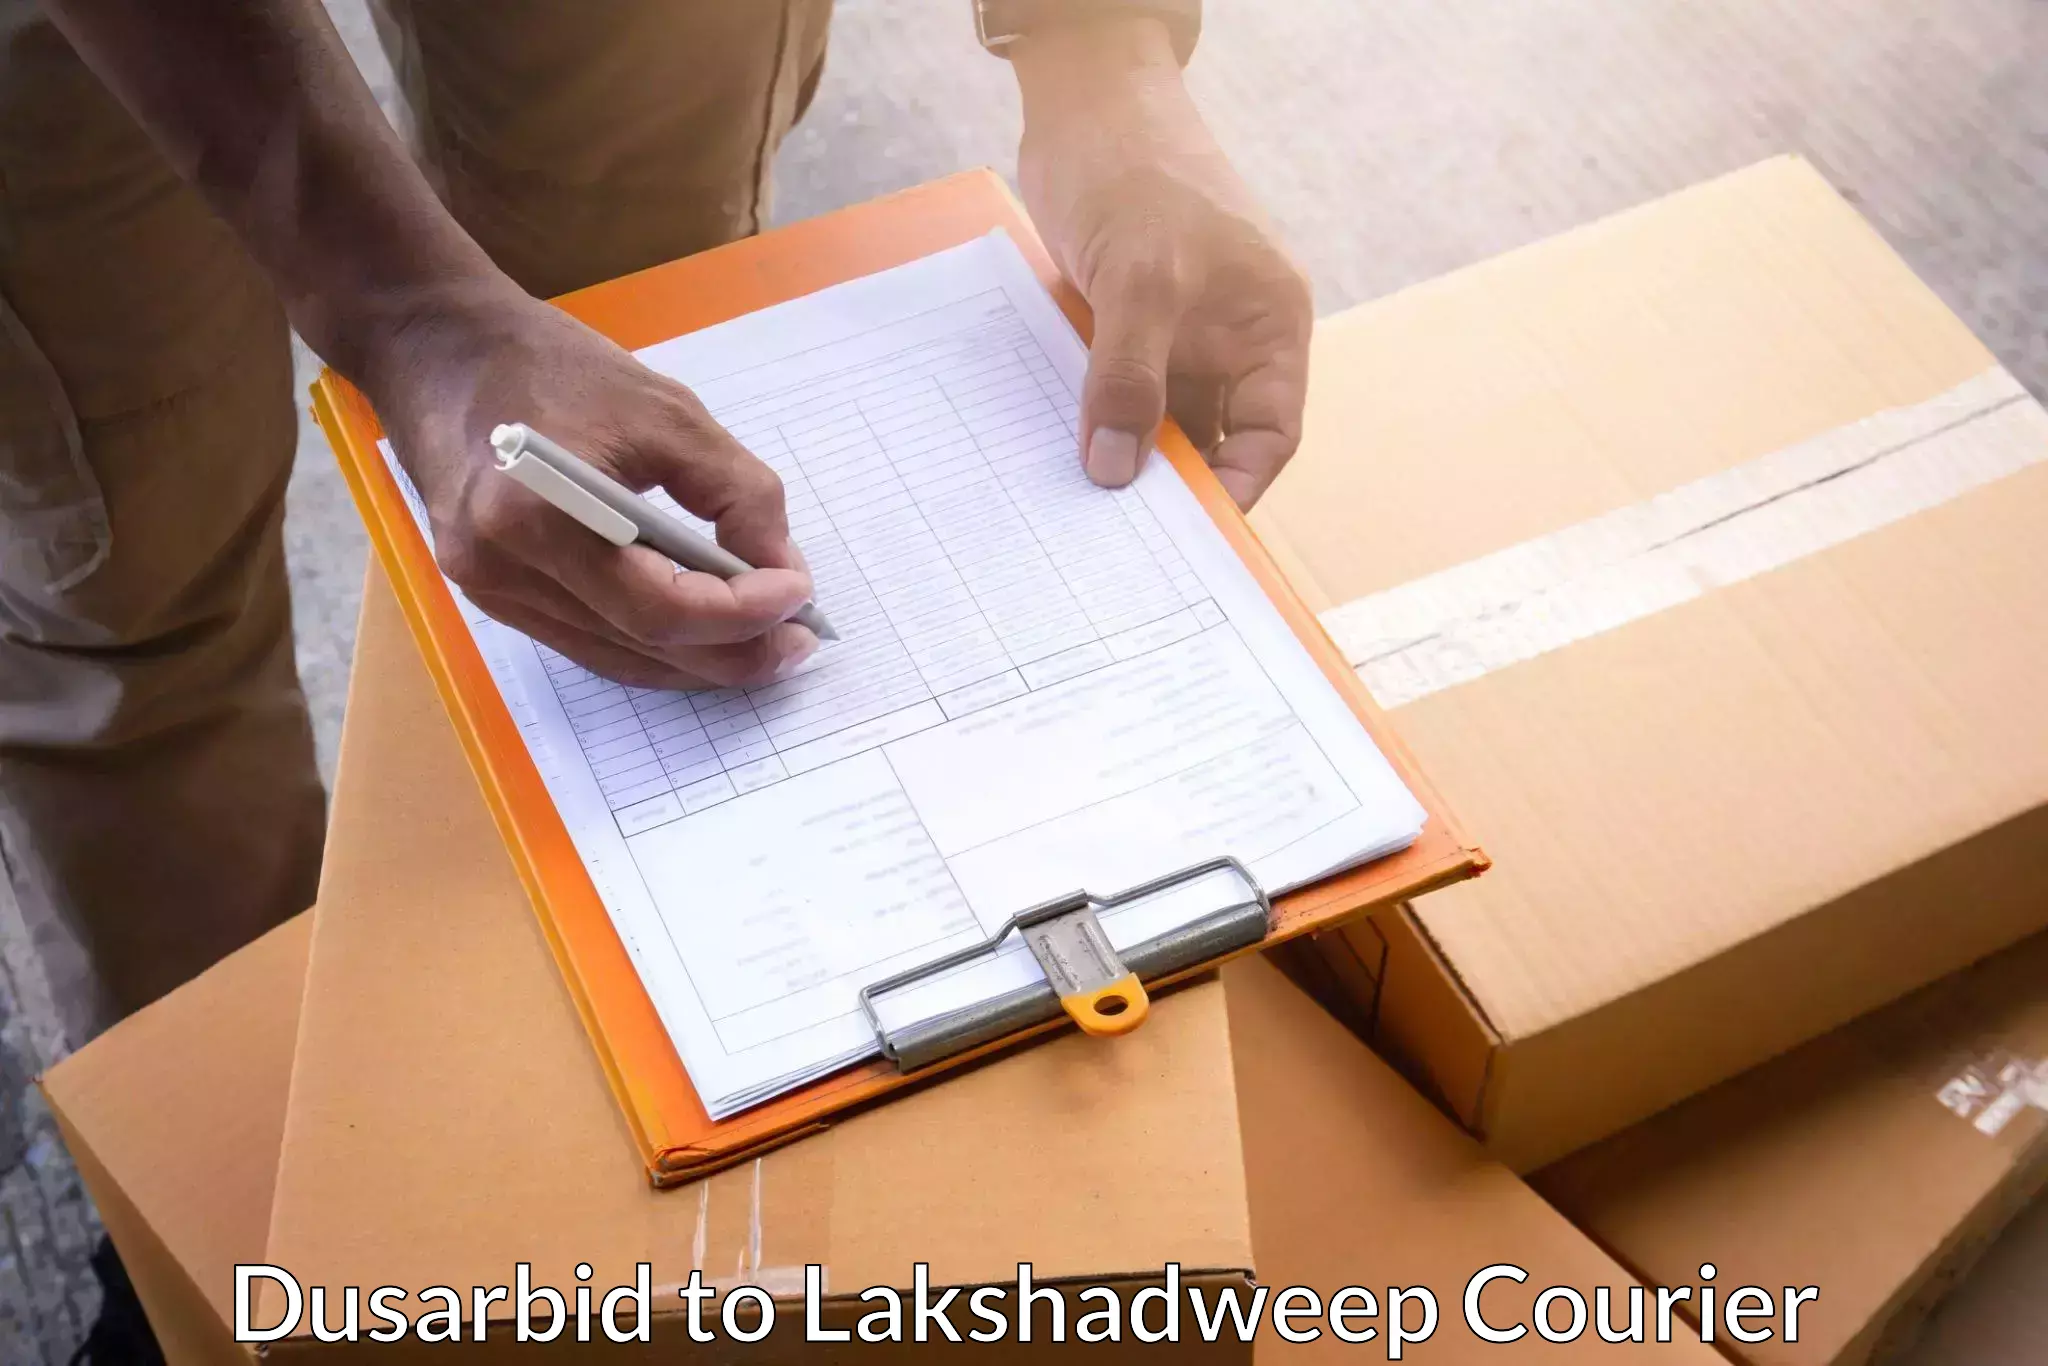 Professional courier handling in Dusarbid to Lakshadweep